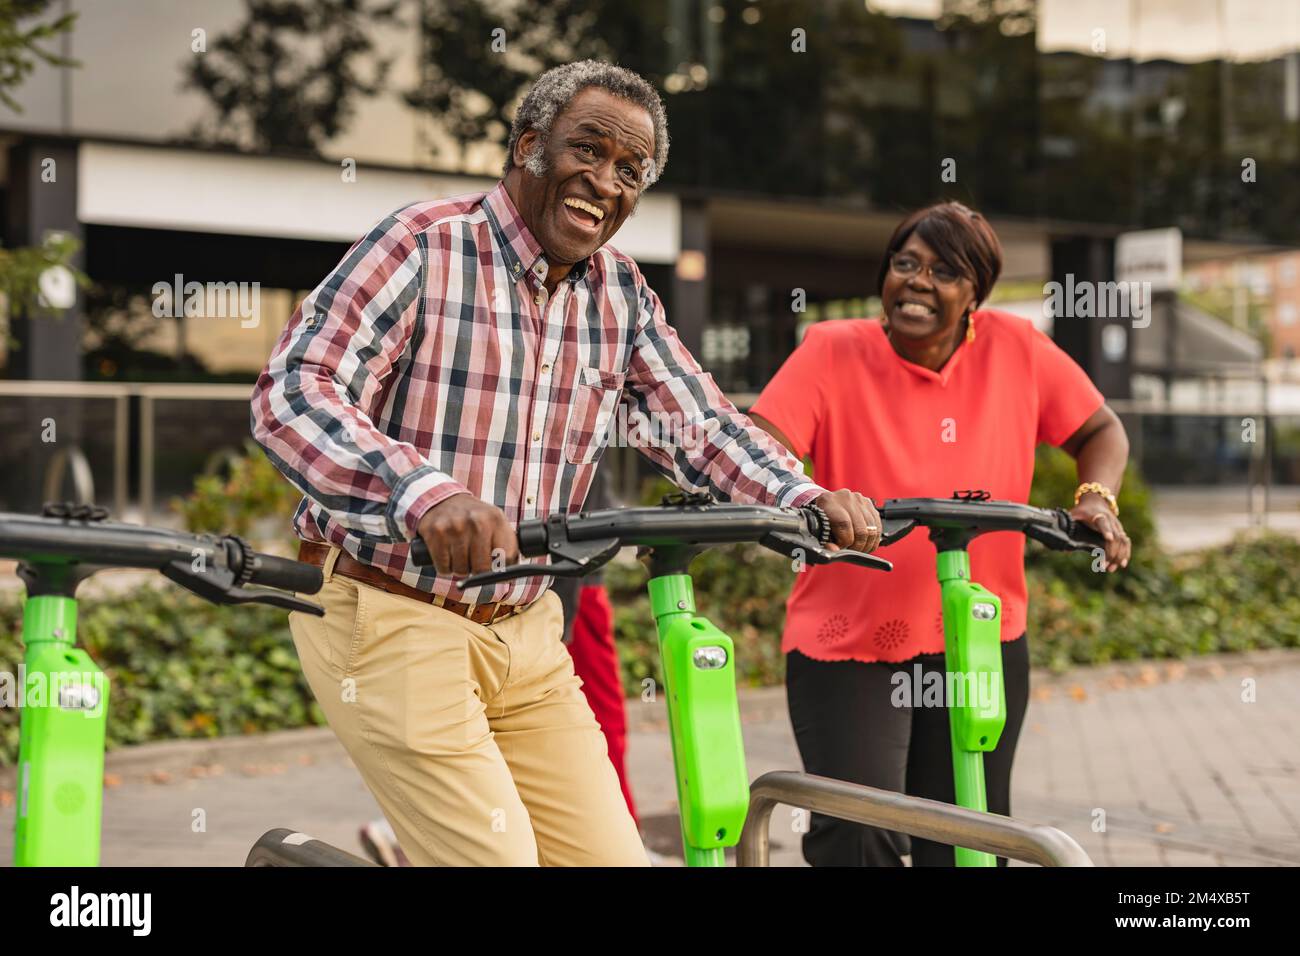 Cheerful senior couple enjoying with each other holding push scooters Stock Photo